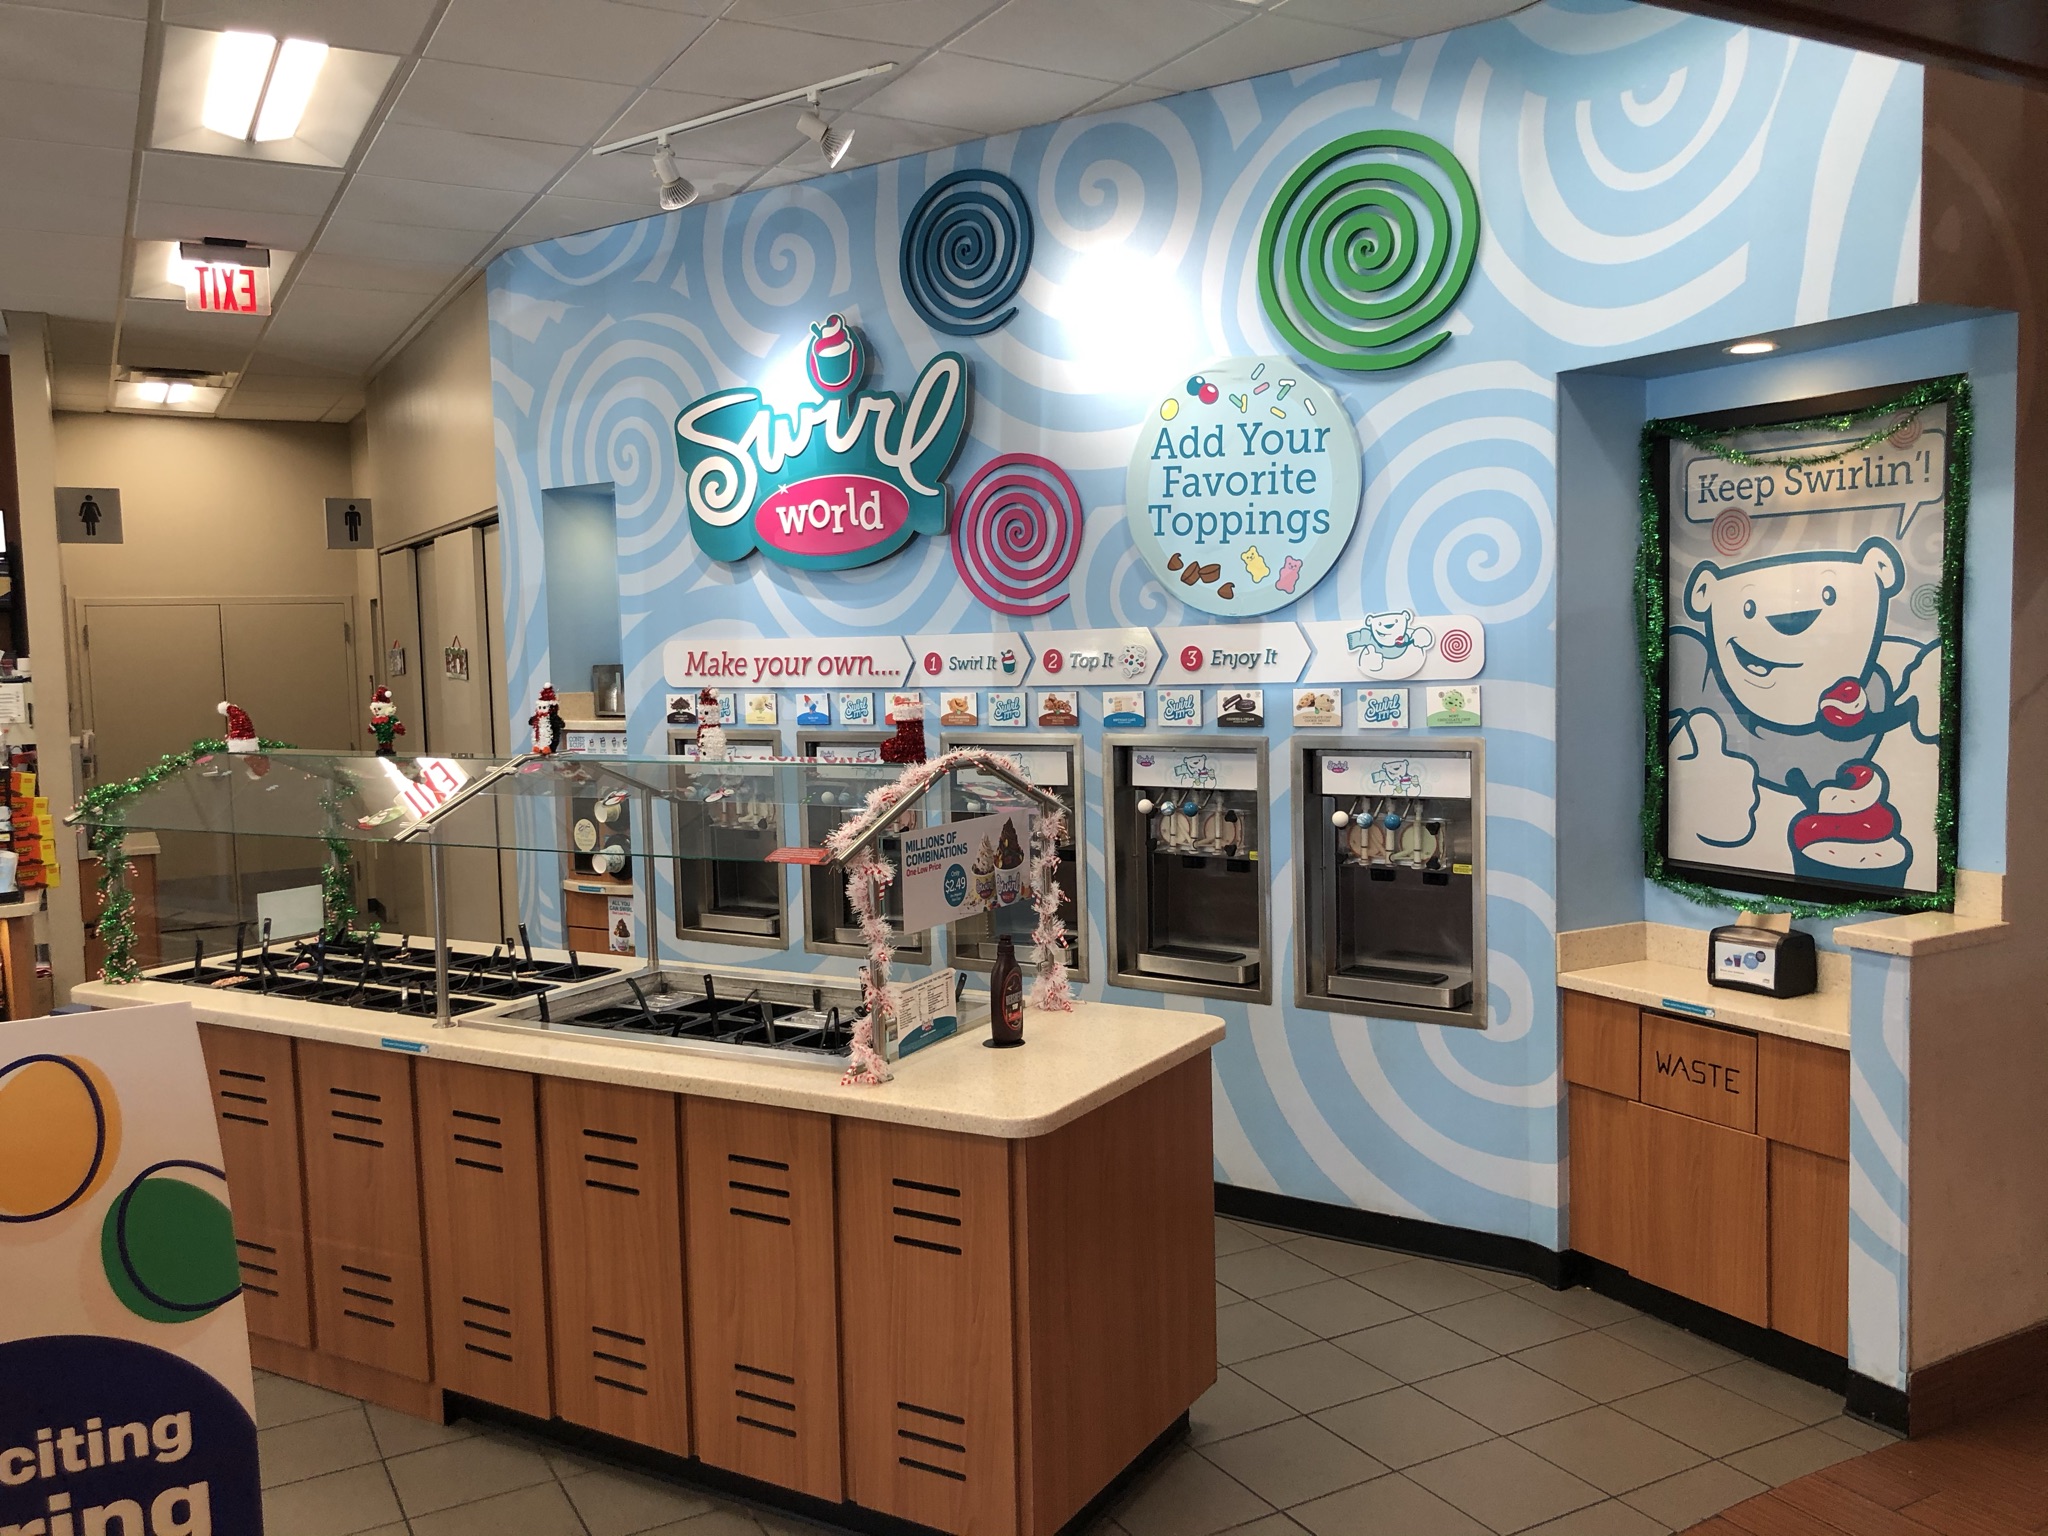 Available property at RaceTrac Swirl World Station